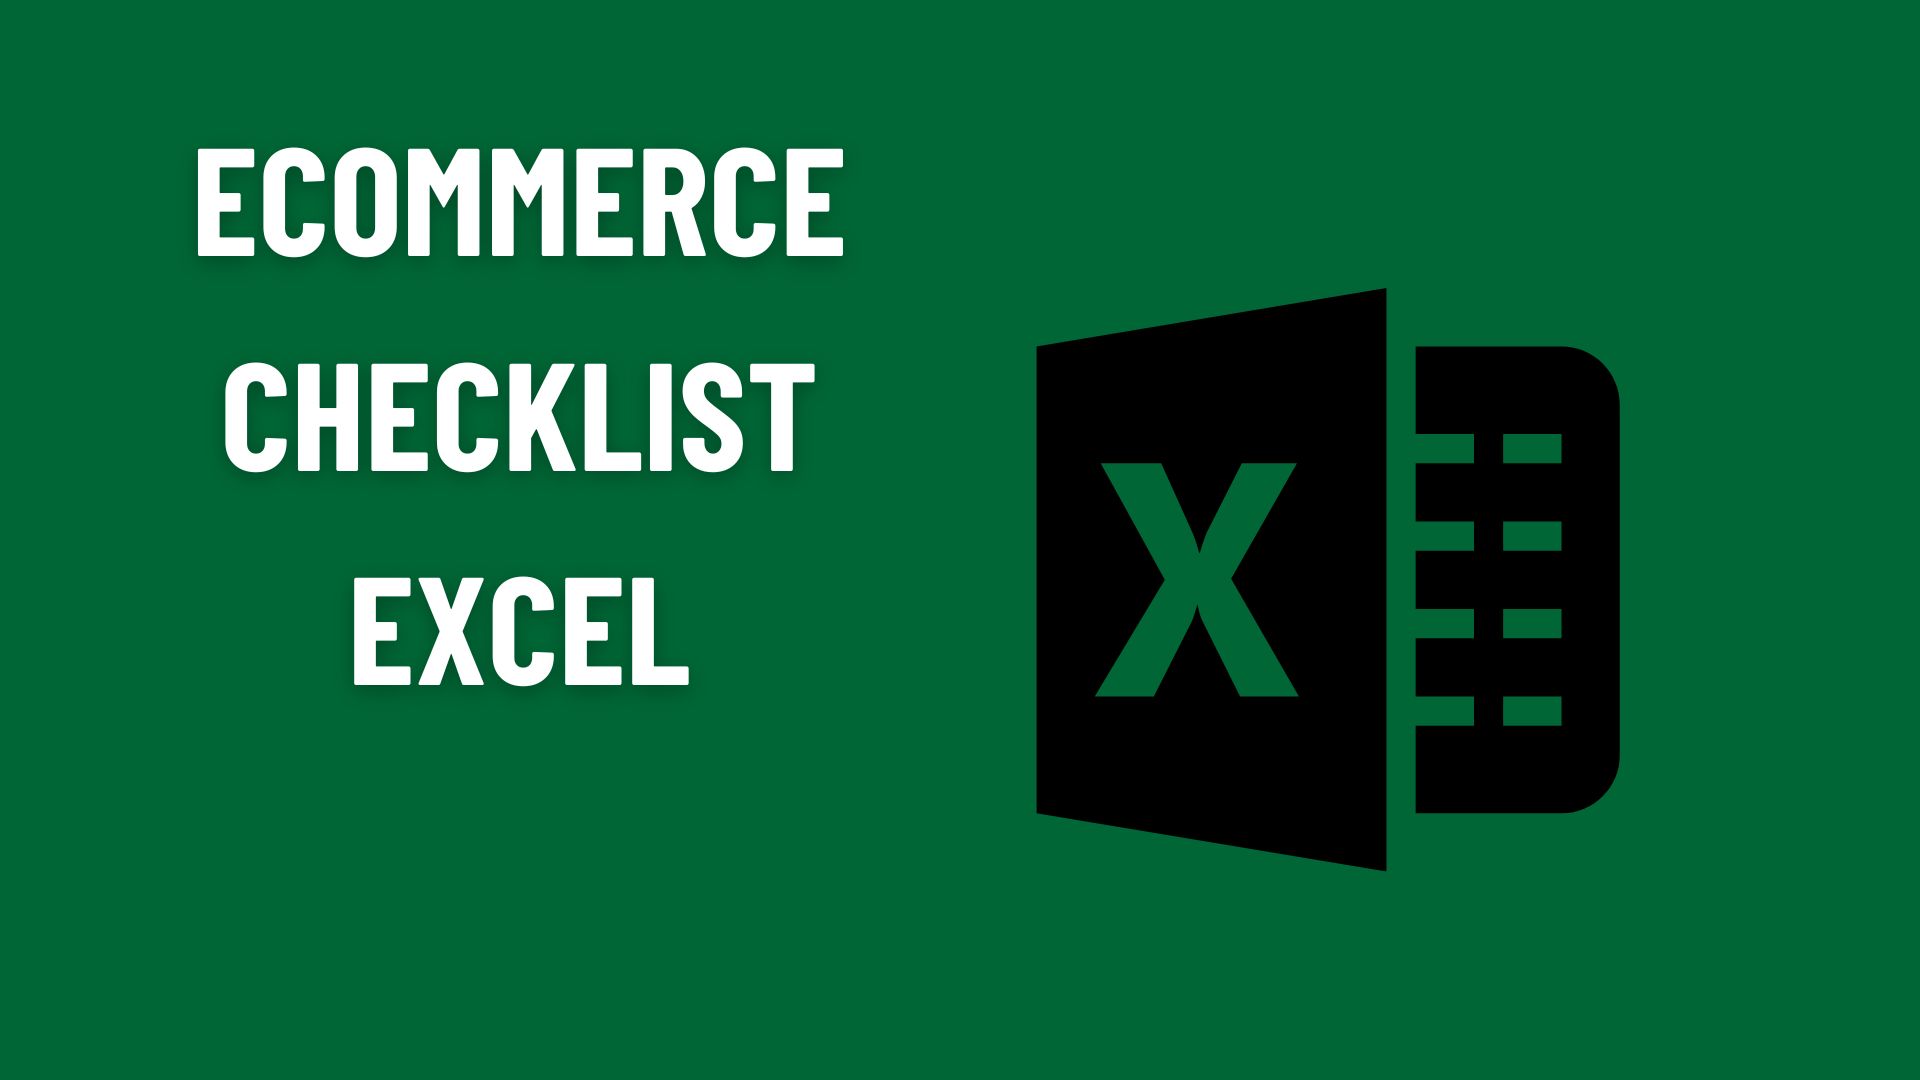 Ecommerce Checklist Excel